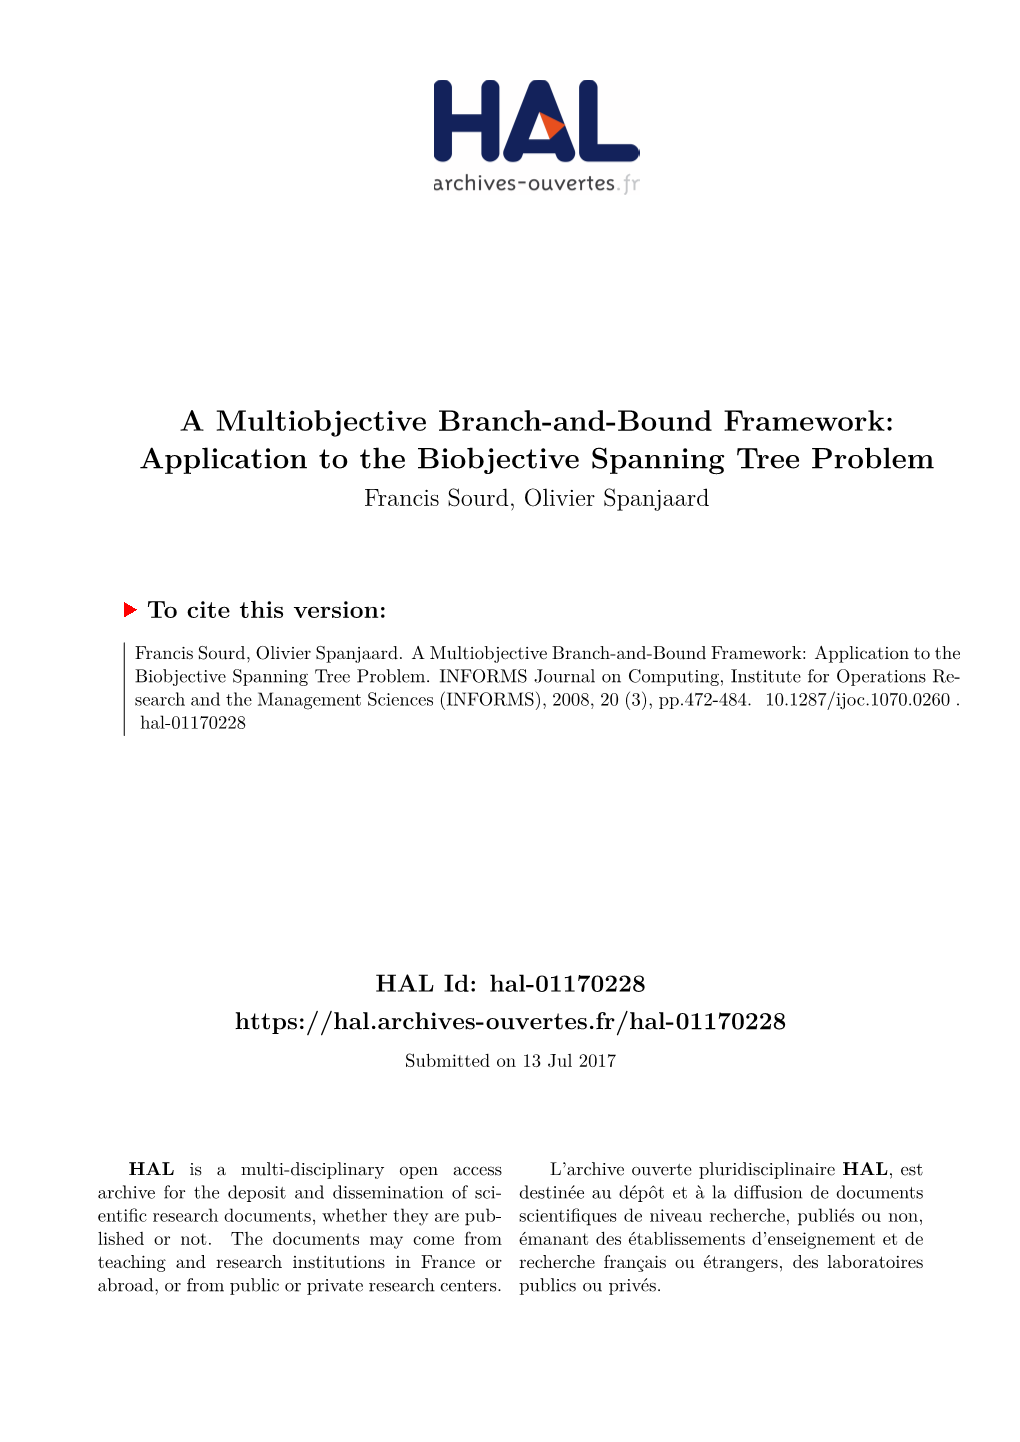 A Multiobjective Branch-And-Bound Framework: Application to the Biobjective Spanning Tree Problem Francis Sourd, Olivier Spanjaard